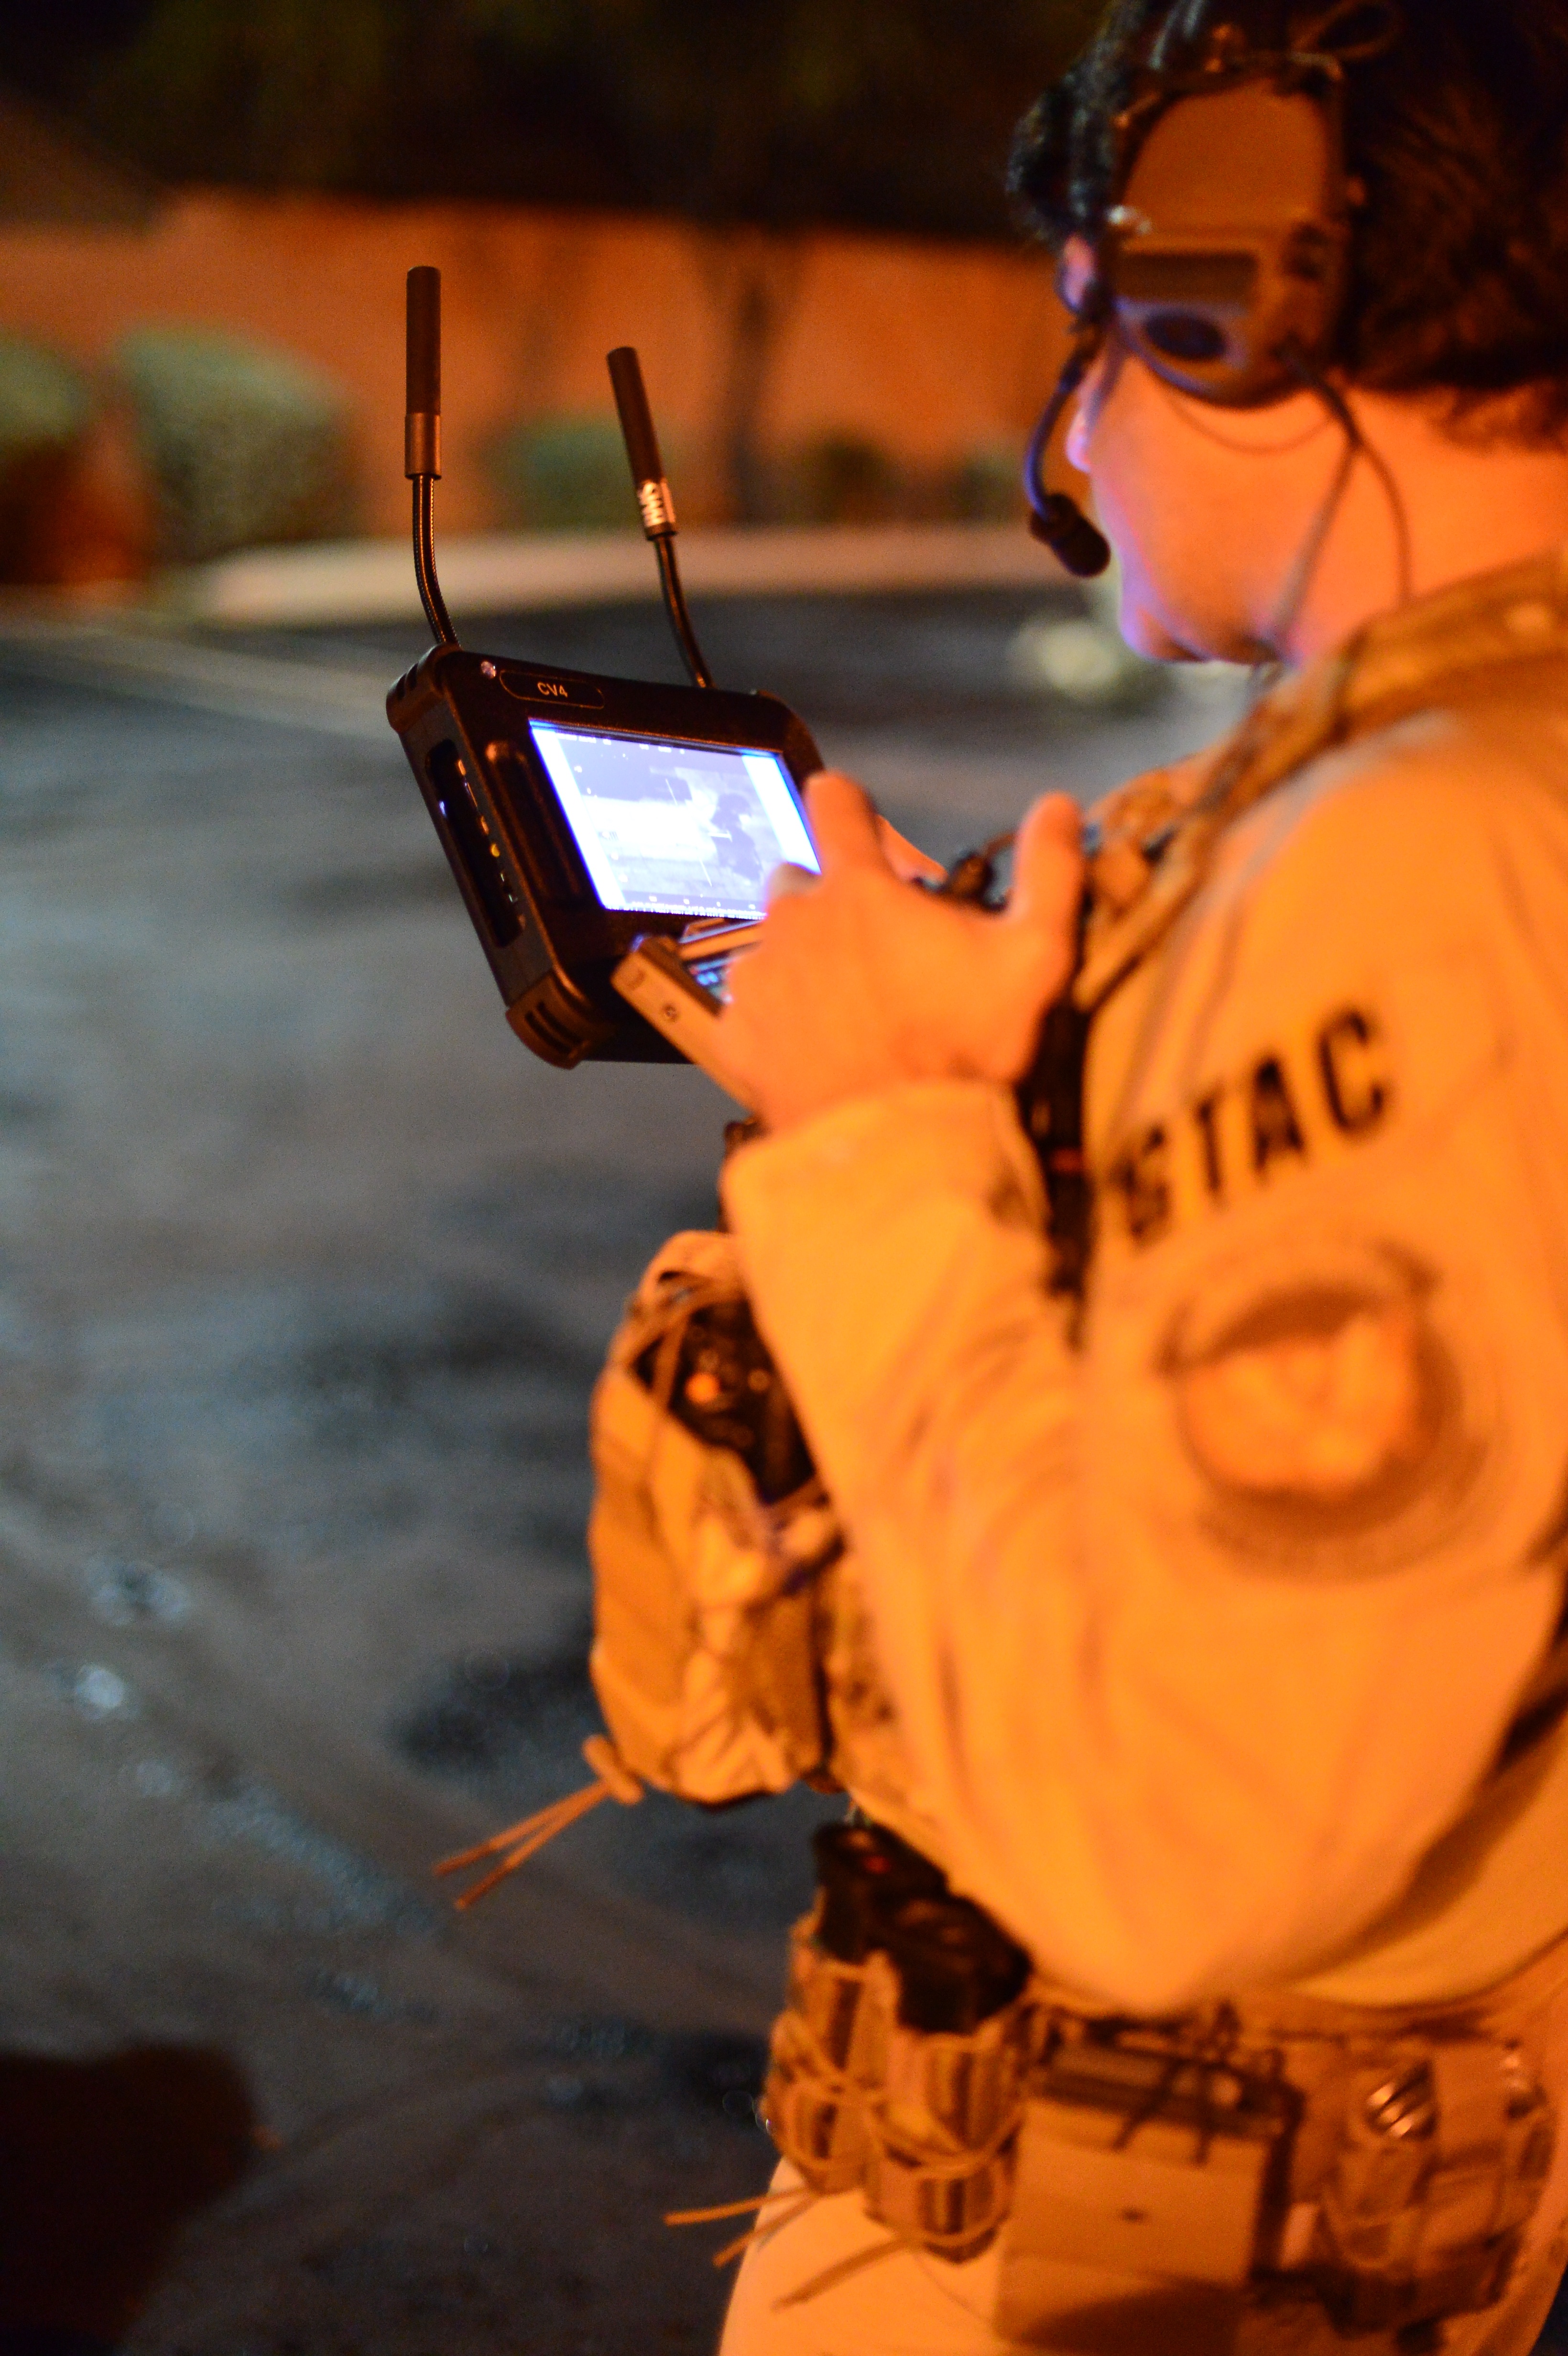 An AMO Ground Team Air Coordinator preparing for the execution of numerous search and arrest warrants in southern Arizona that dismantled a local drug trafficking organization suspected of distributing and selling heroin, marijuana, and various firearms.